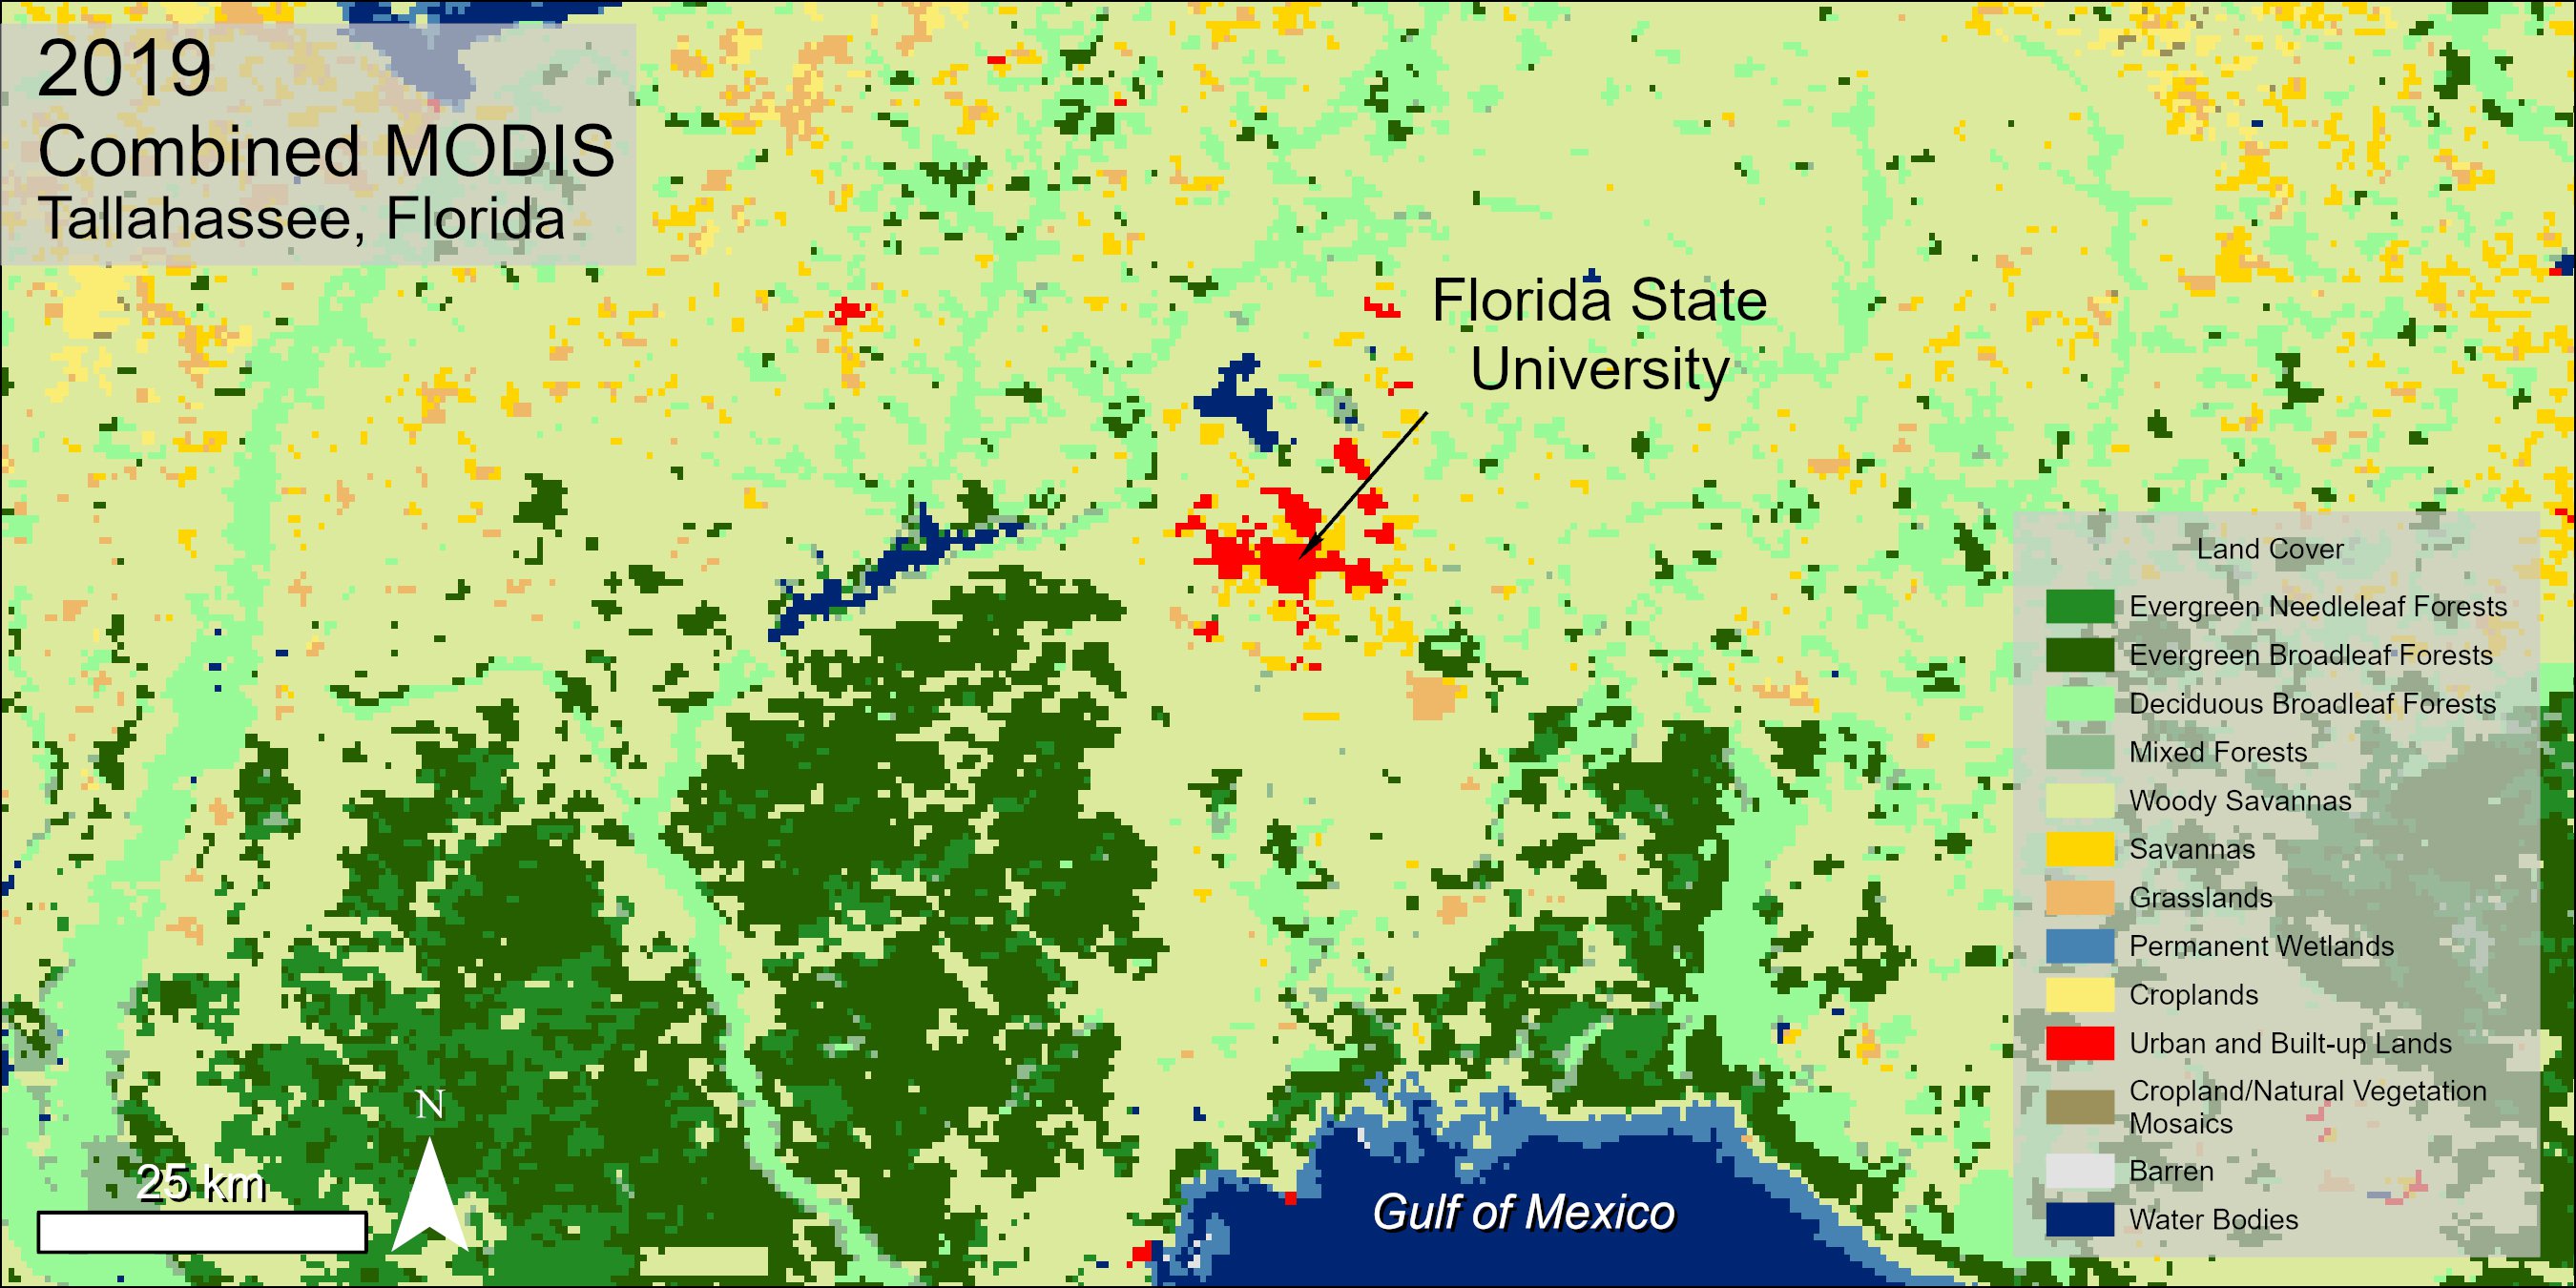 Combined MODIS land cover data over Tallahassee, Florida.